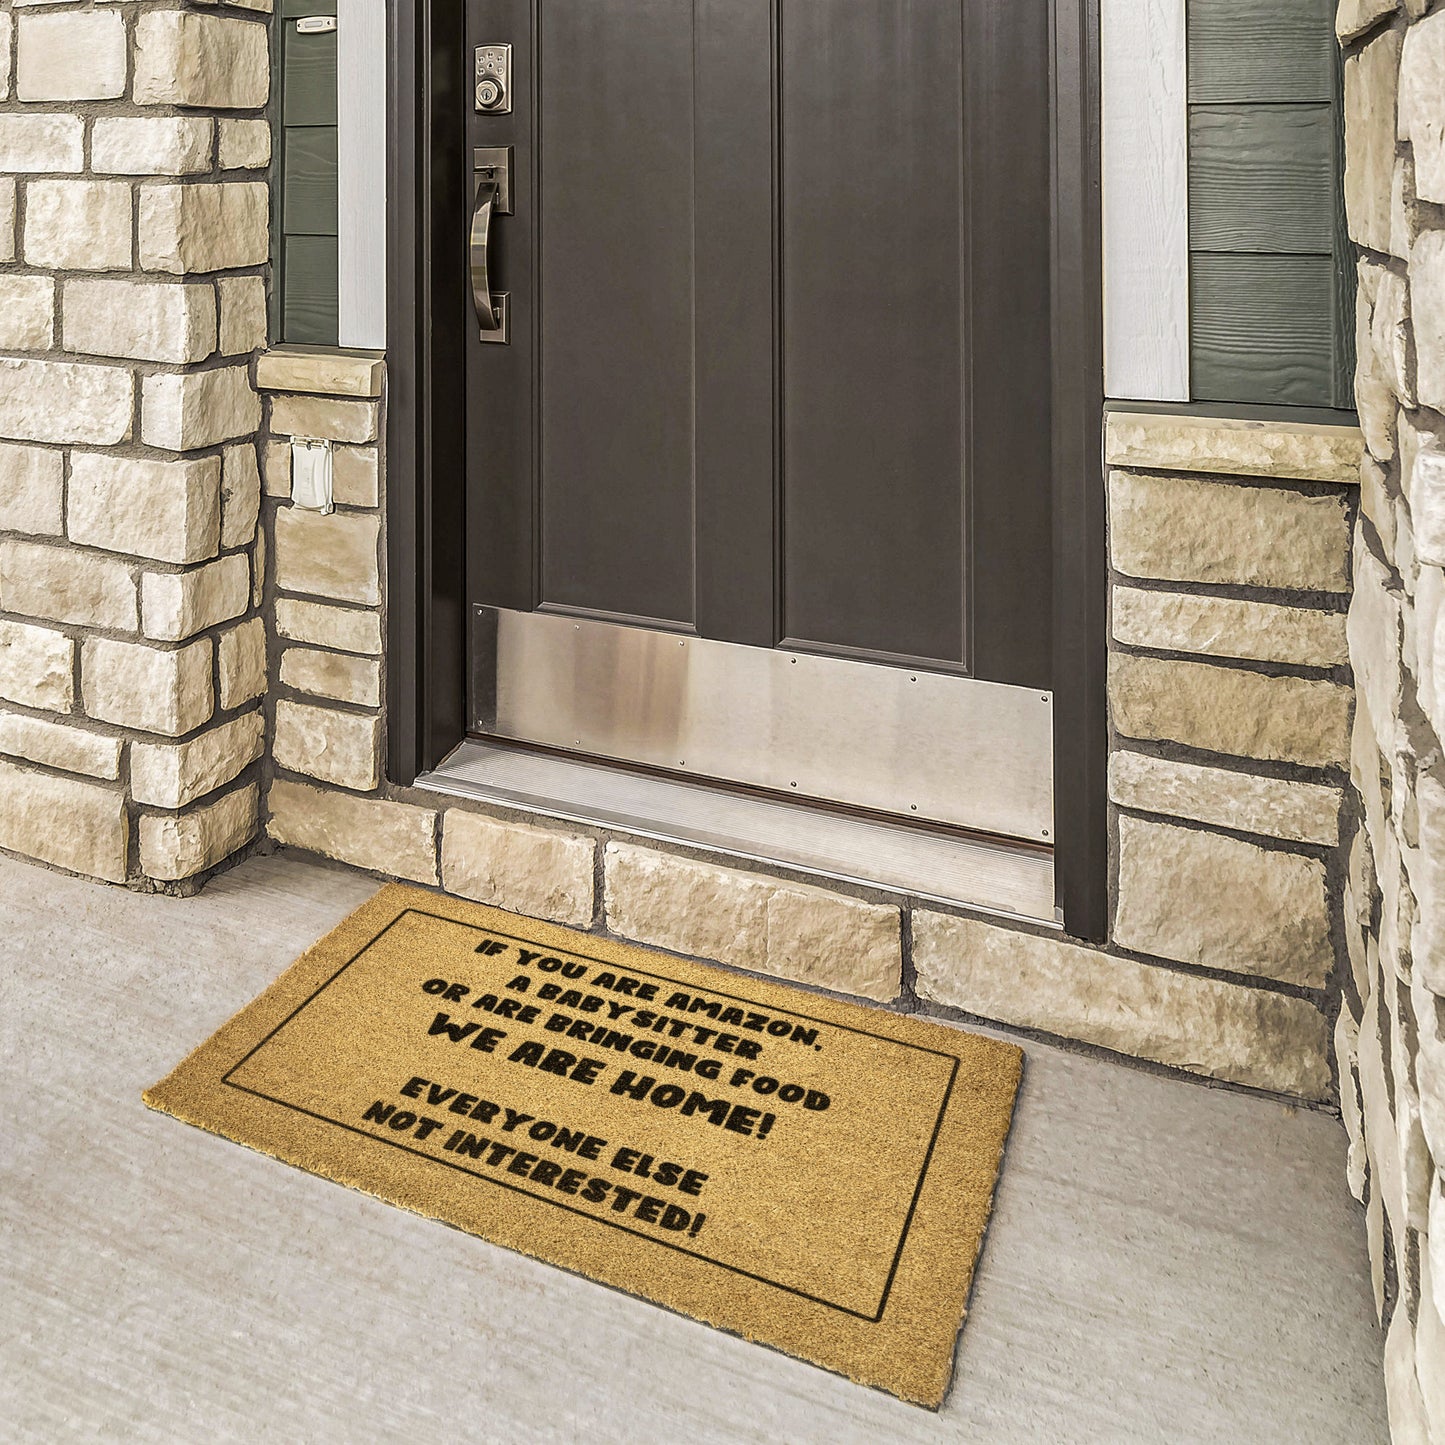 Funny Welcome Doormat - Perfect for busy families who love Amazon, Babysitters and Food Deliveries!